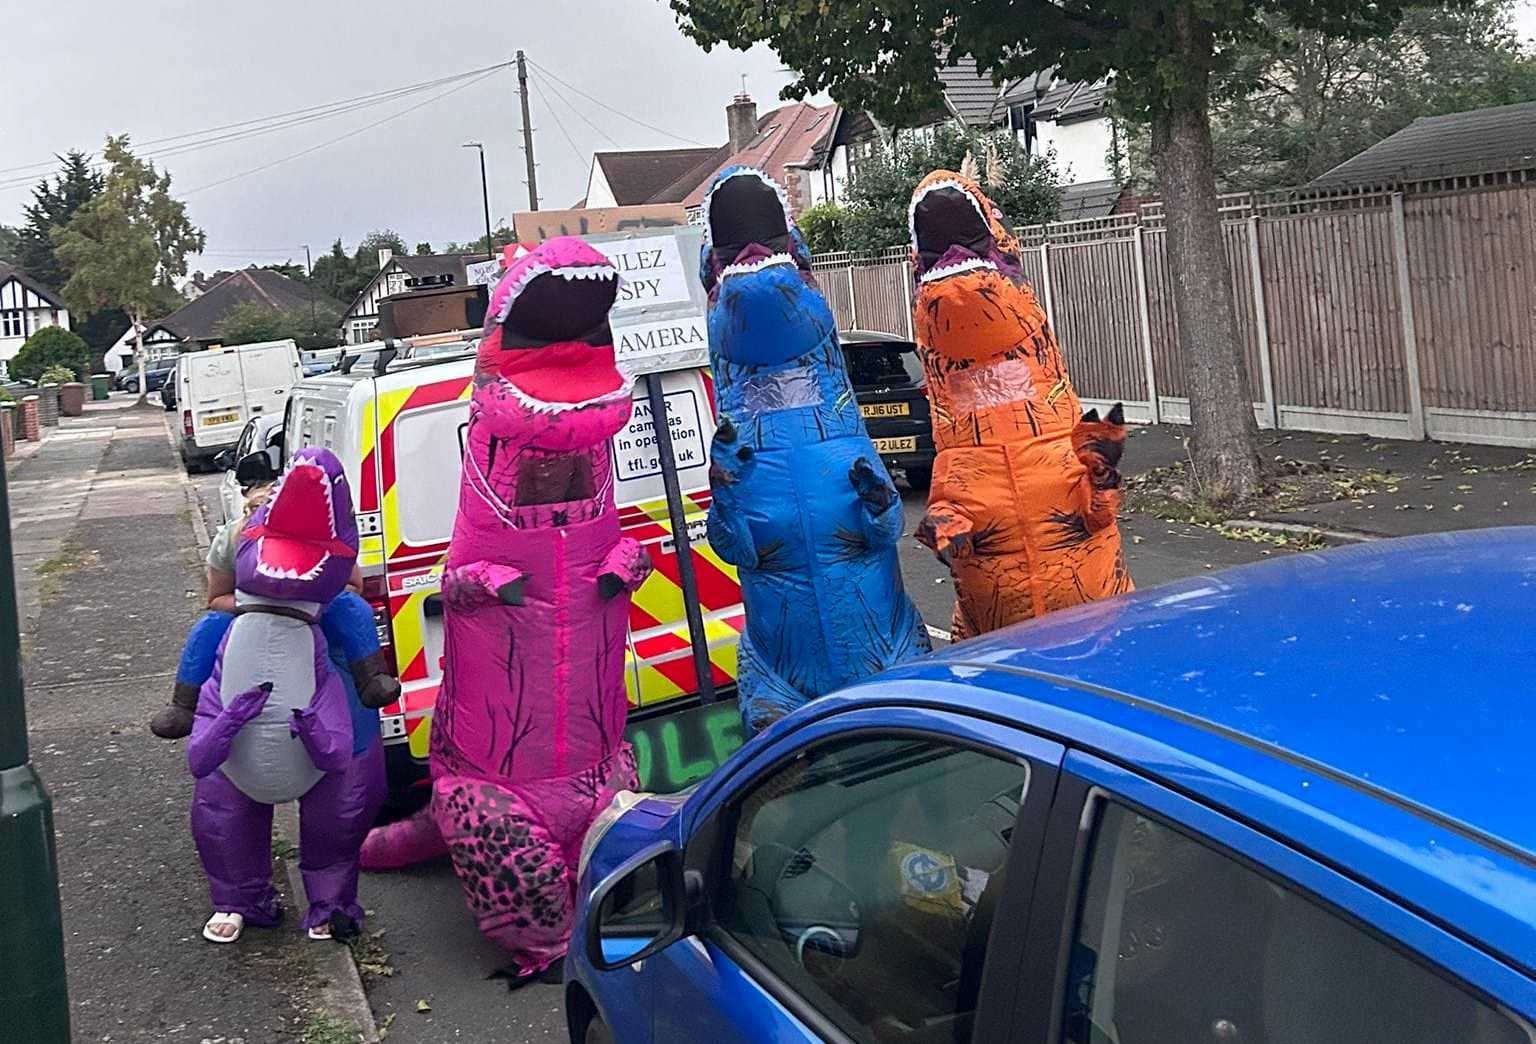 The dinosaur group have different-coloured costumes as they look to block ULEZ cameras. Picture: Paul Sullivan